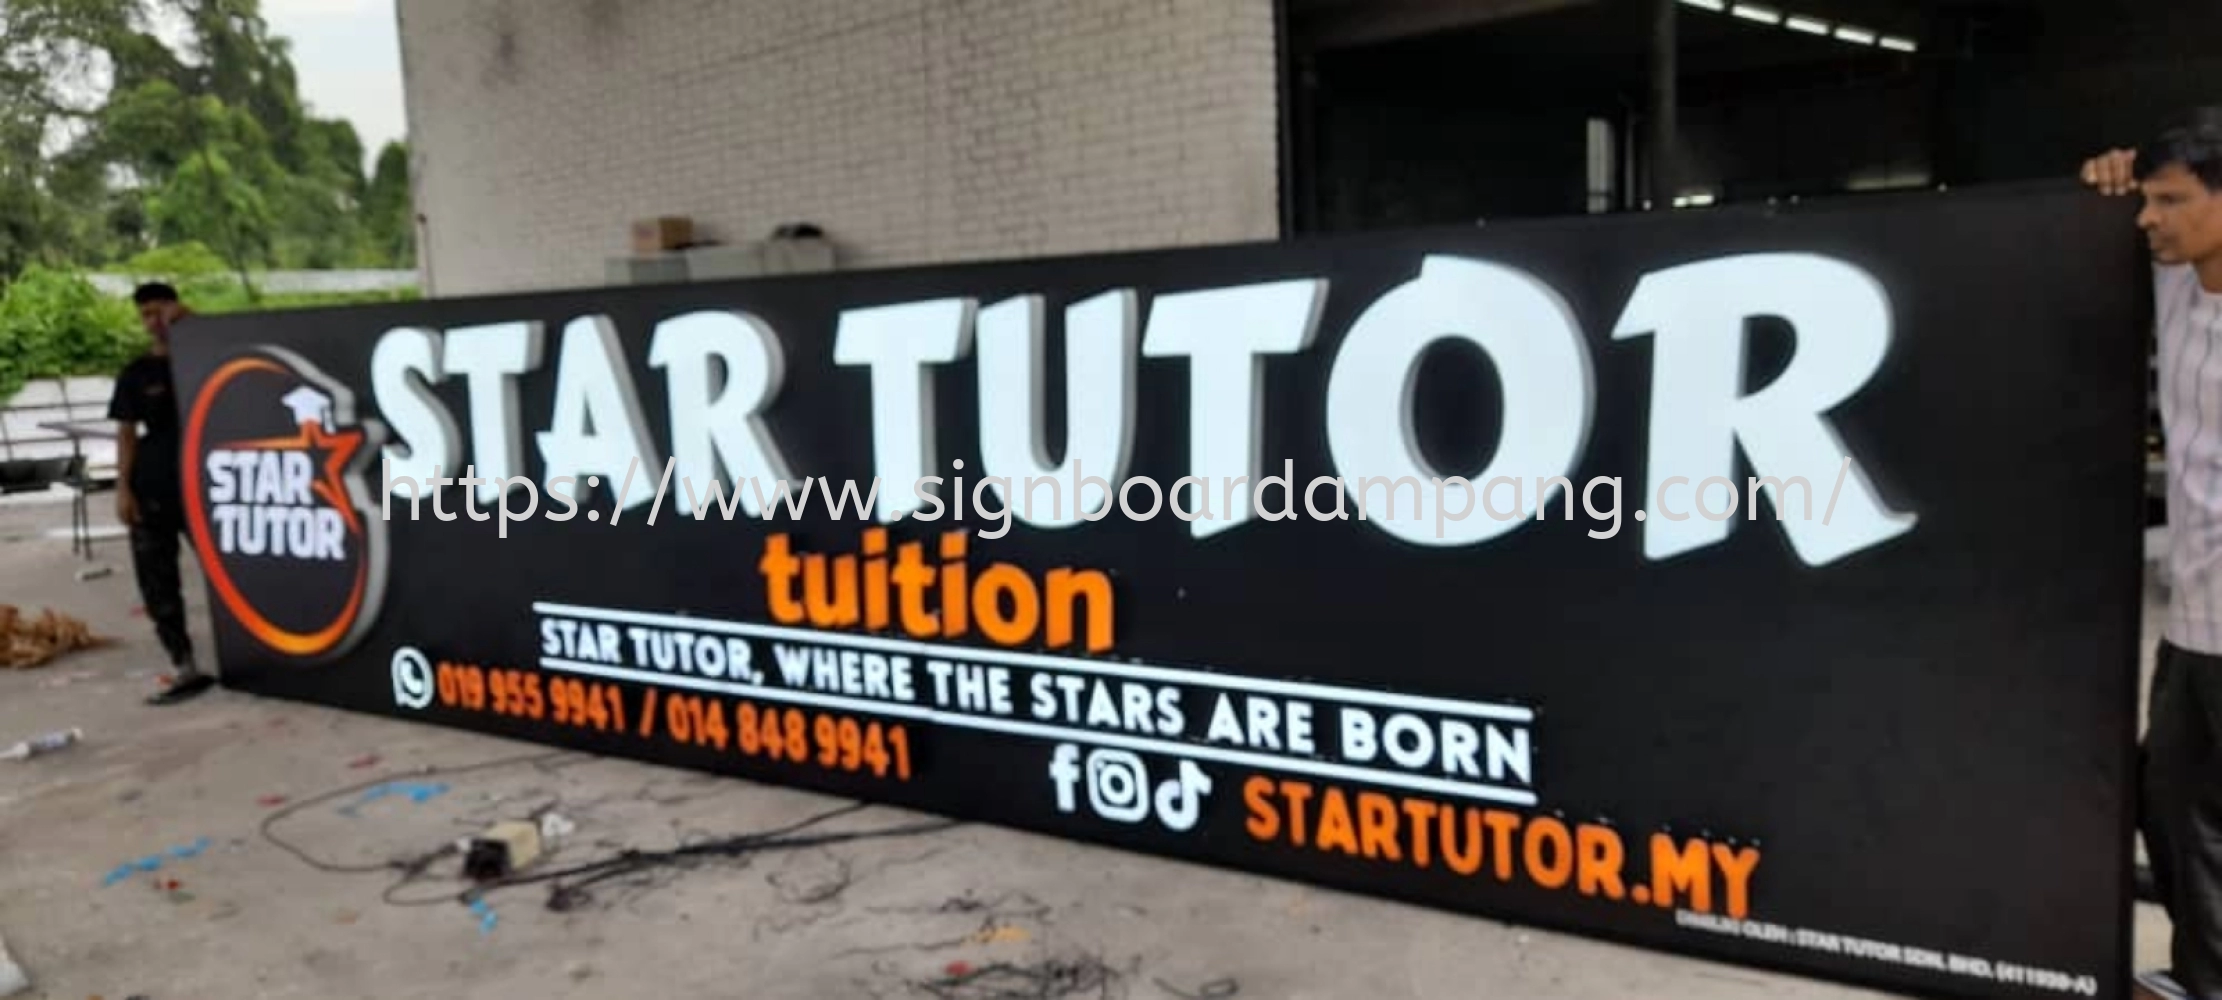 Star Tutor - Tuition - Outdoor 3d led frontlit signage - Shan Alam 